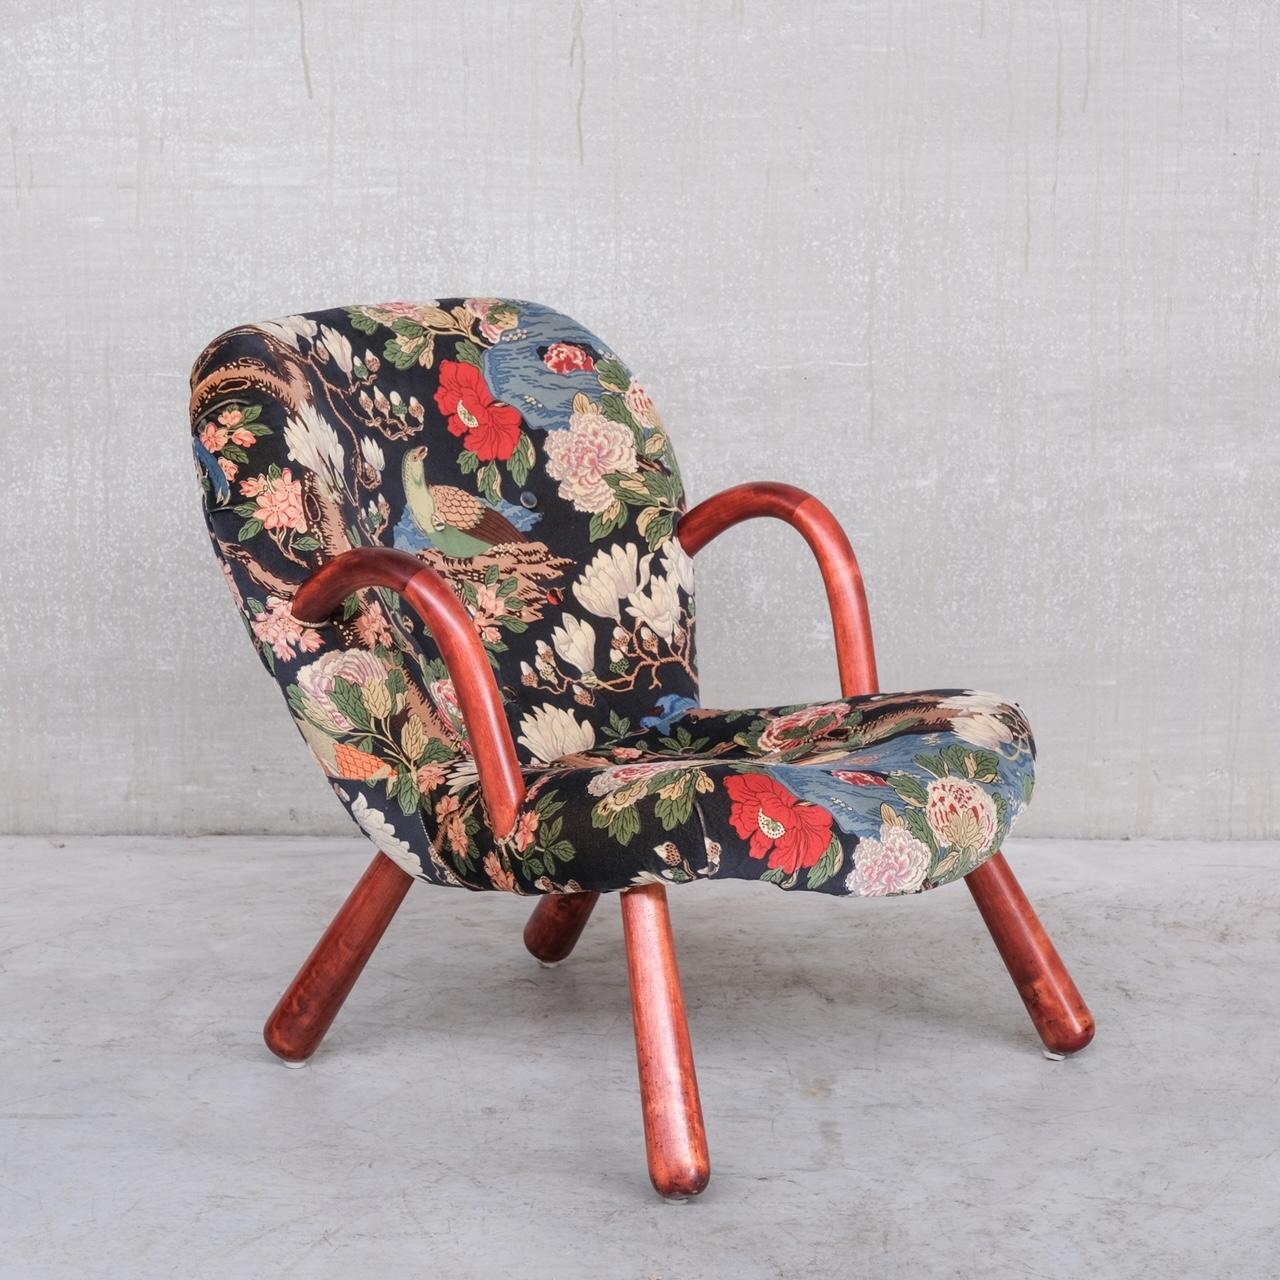 An increasingly hard to find 'clam' chair. 

Denmark, c1950s. 

Attributed to Arnold Madsen, similar models were made by Philip Arctander. 

The current fabric is in good condition but is fairly bright and flamboyant, and is ripe for